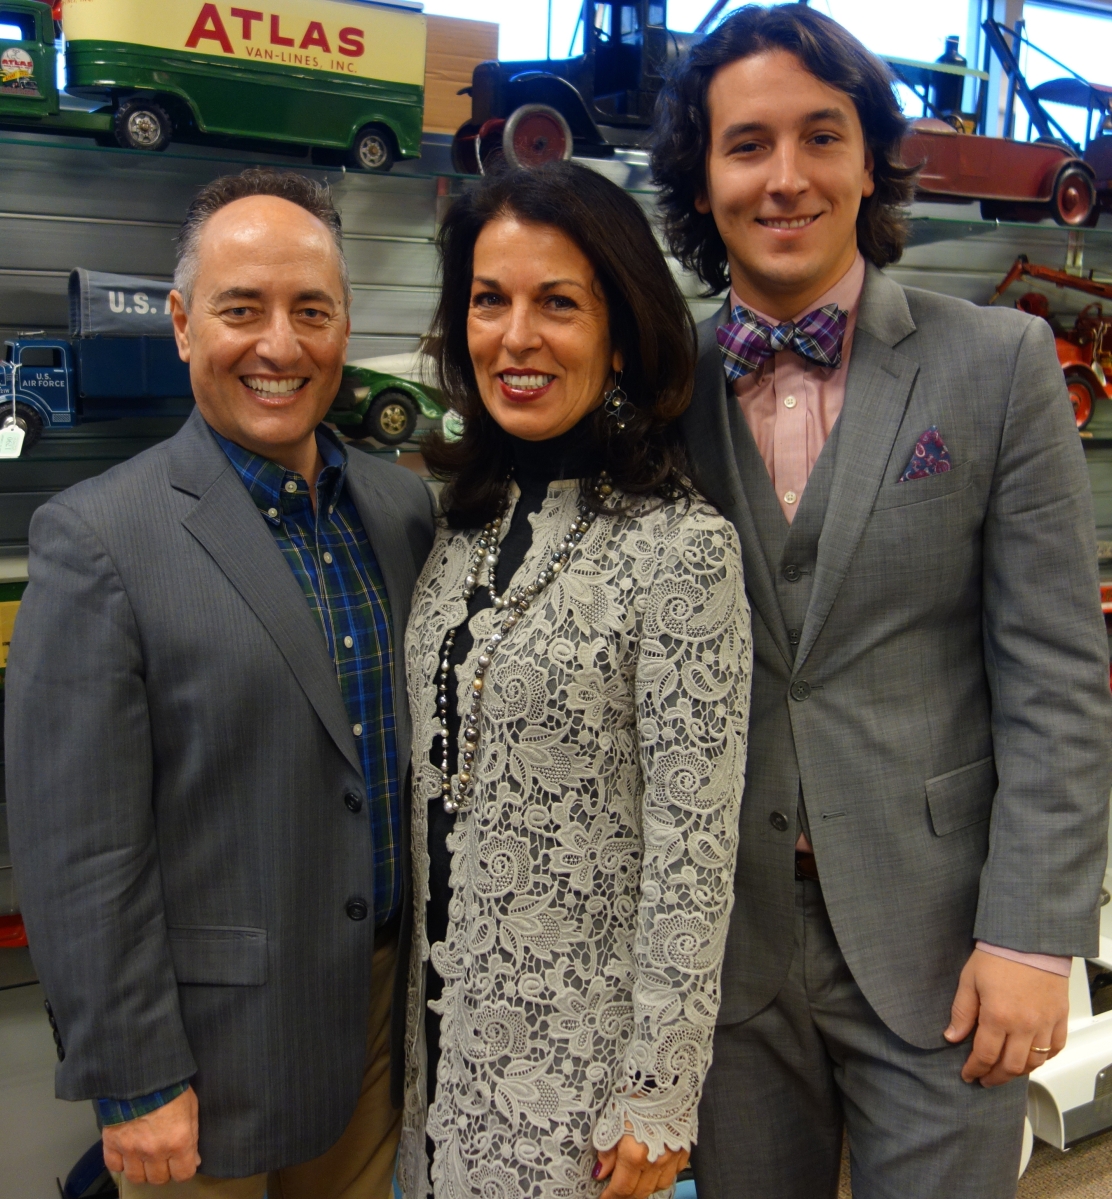 Auctioneers Tim Luke, left, and Michael Bertoia, with Jeanne Bertoia just before the auction began on Friday morning.